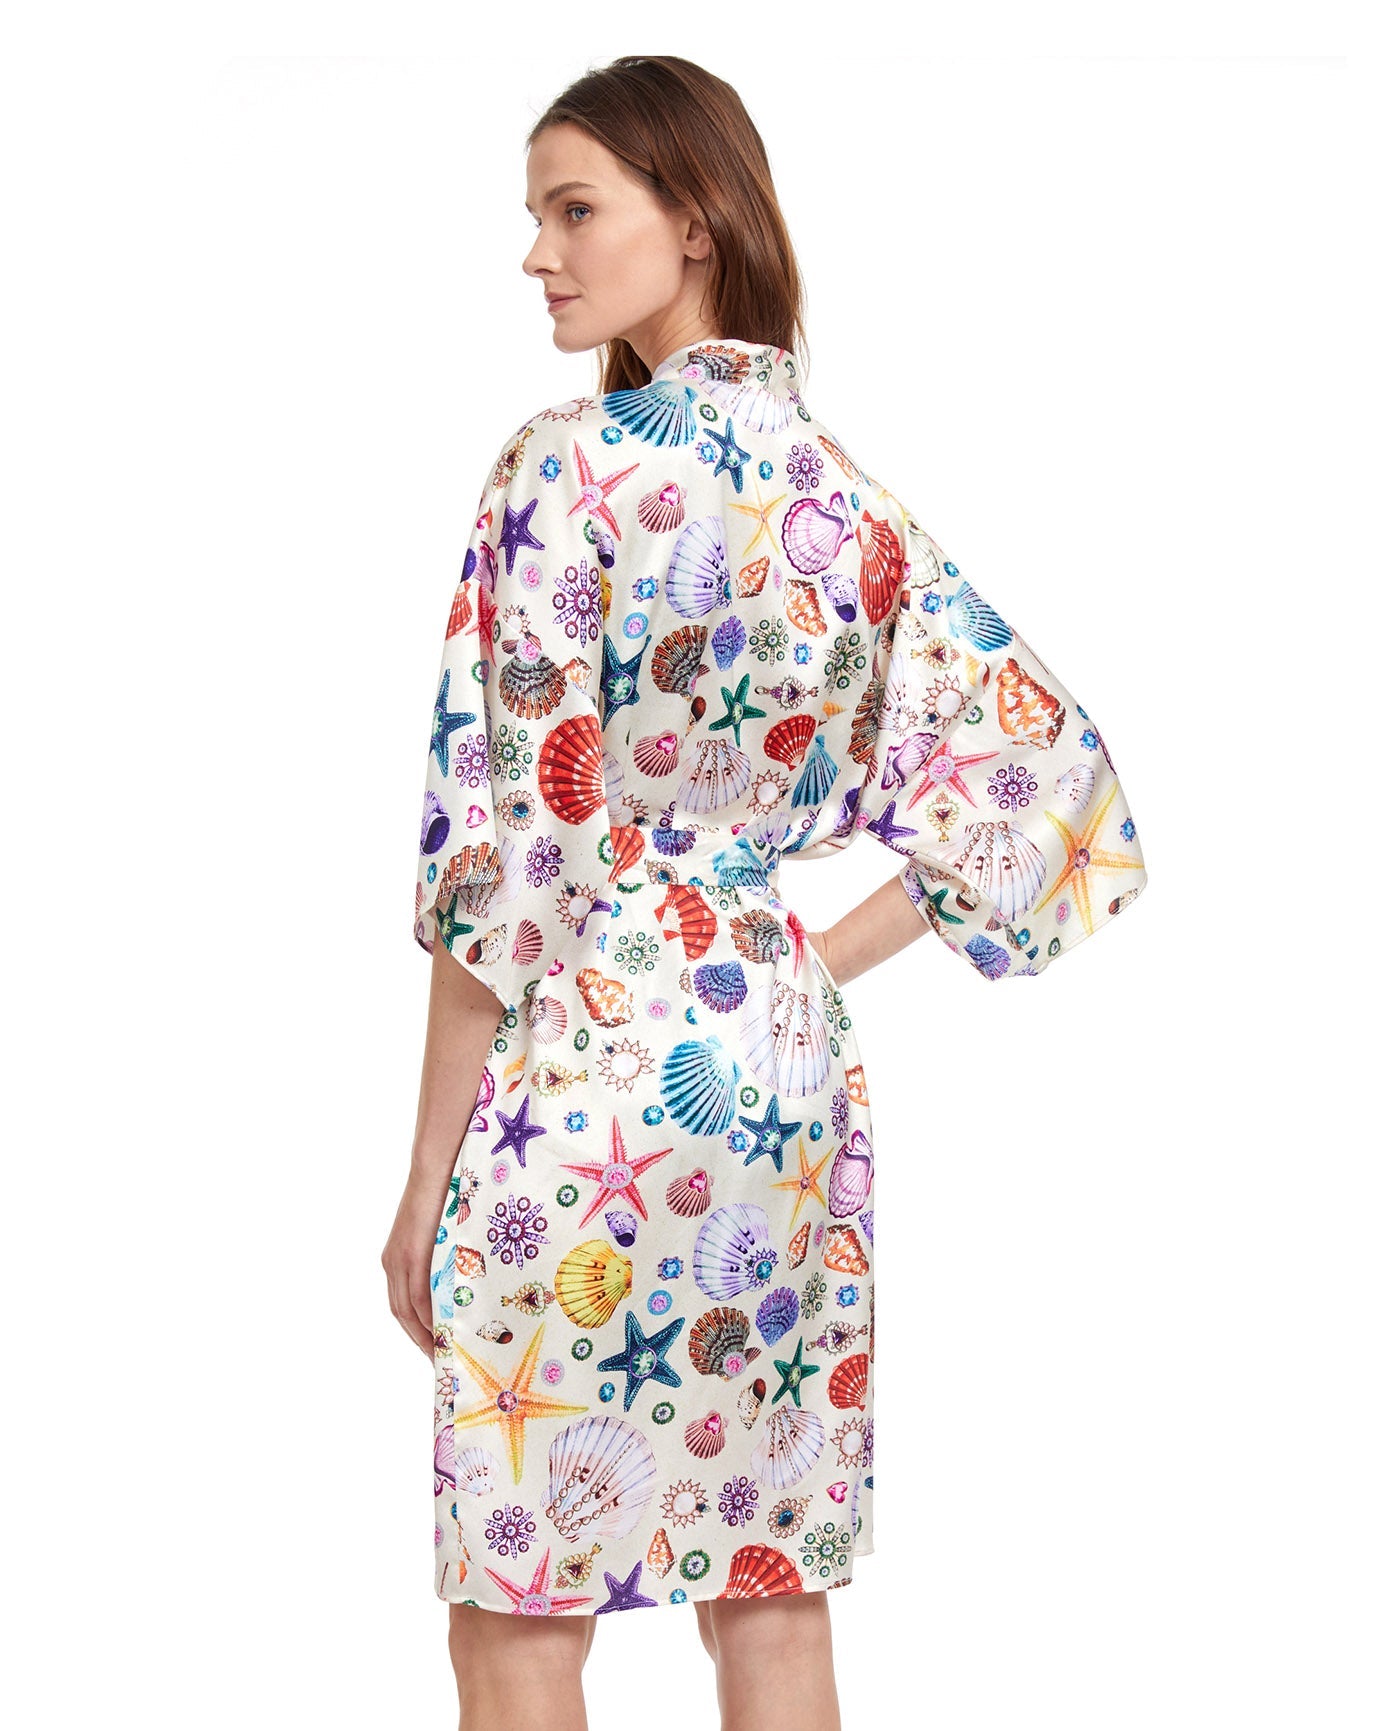 Back View Of Gottex Classic White Sands Sand Kimono Cover Up Dress | Gottex White Sands White